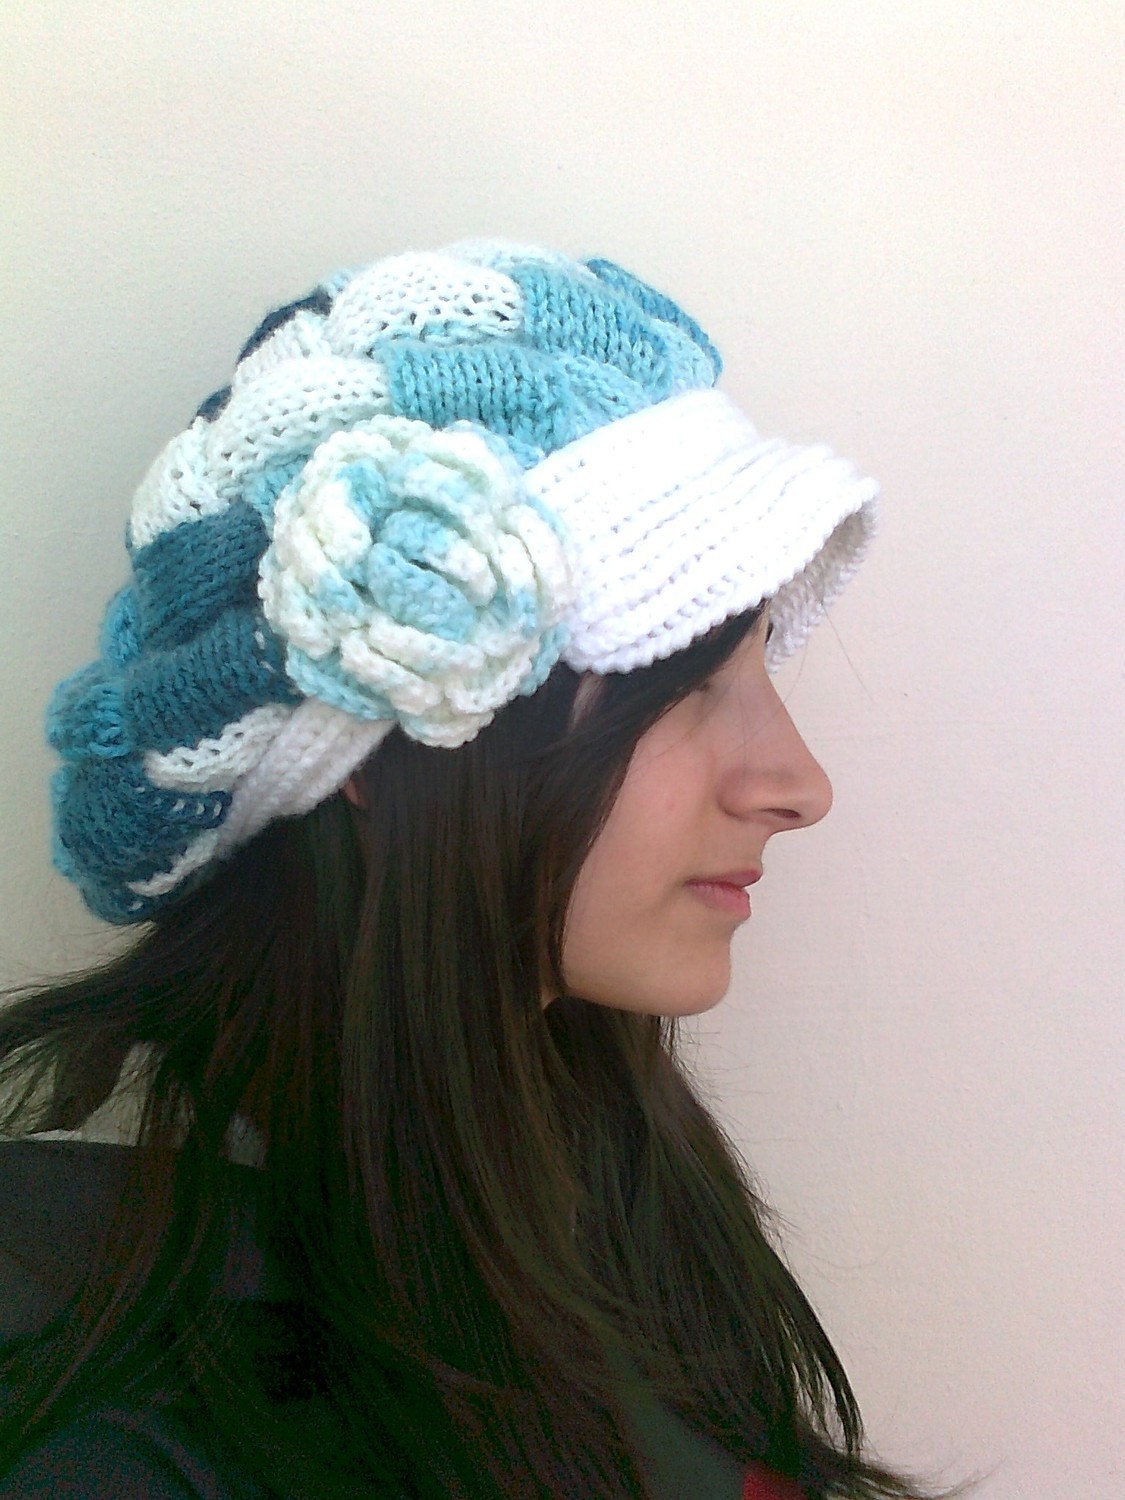 Shades of Turquoise Slouchy Newsboy Cap -Flower- Handmade-Knitted newsboy brimmed slouch hat